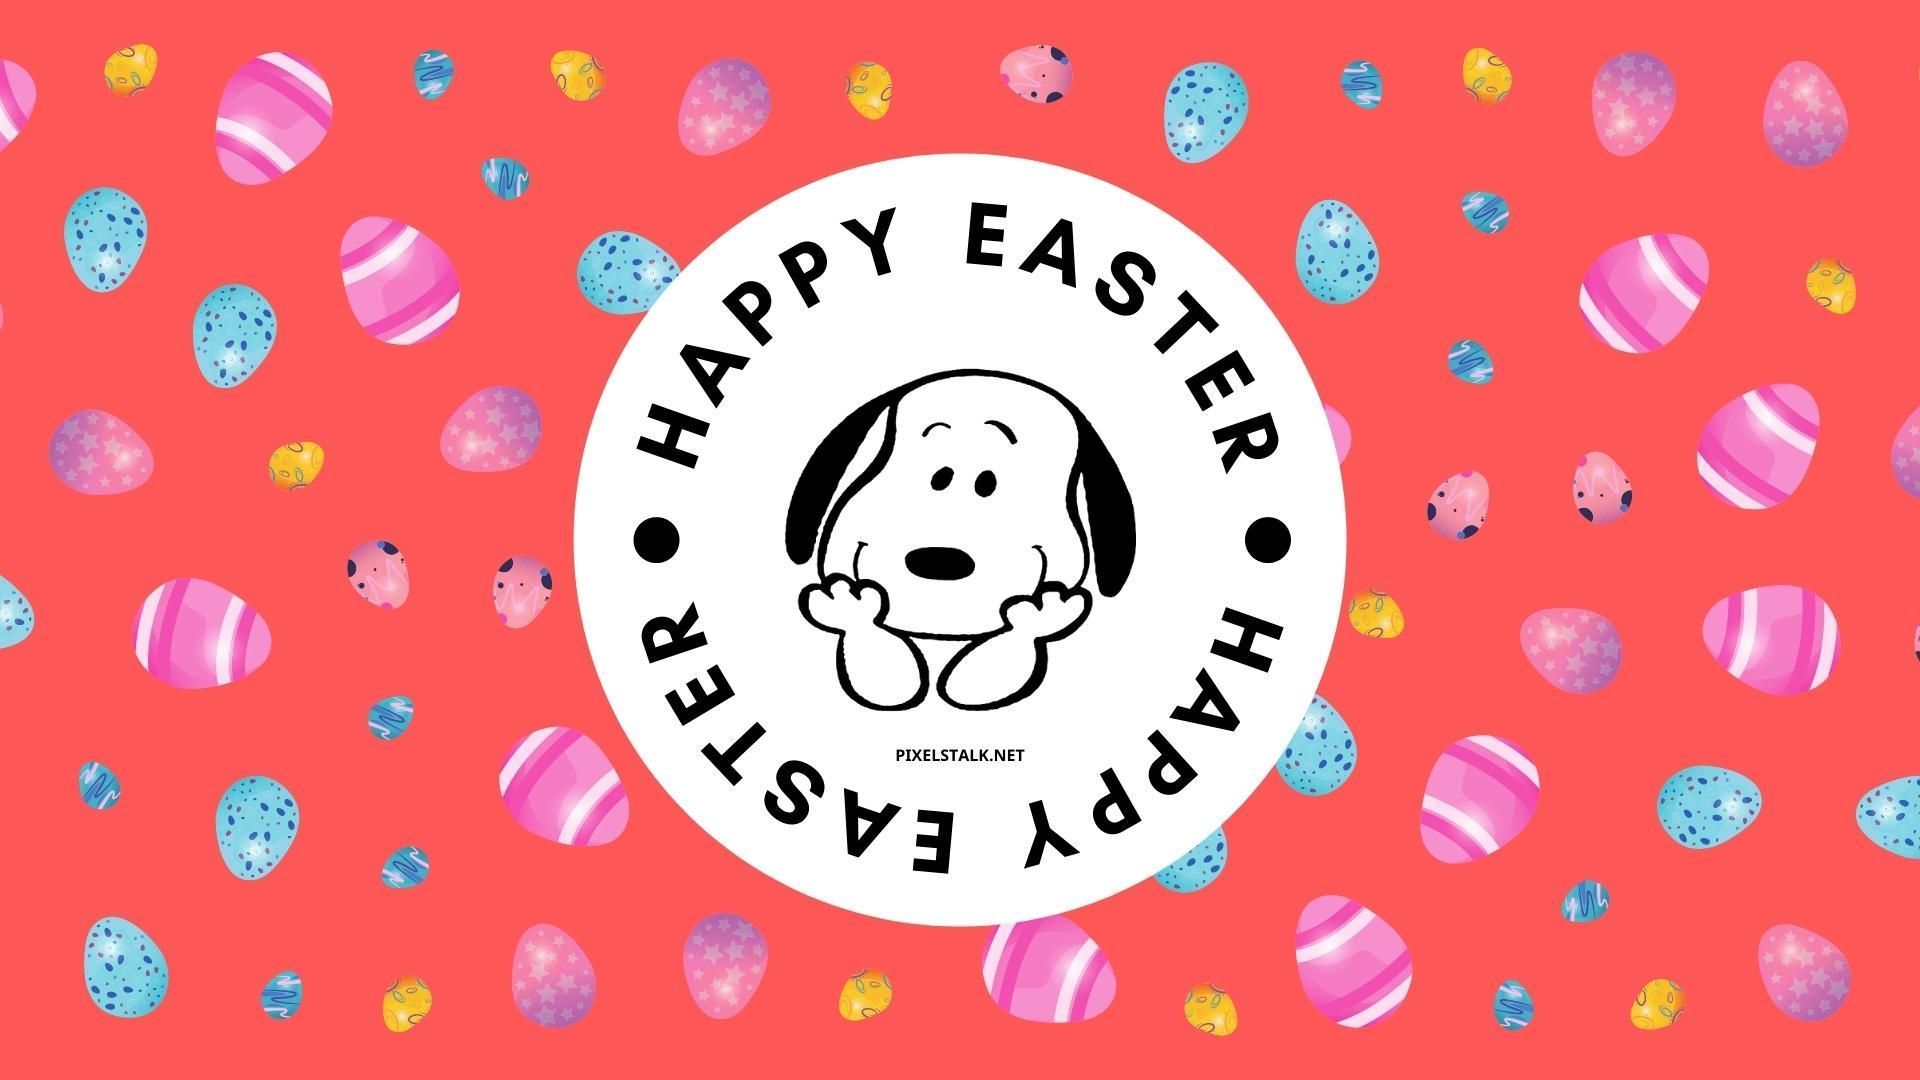 Snoopy Easter Wallpaper HD Free download